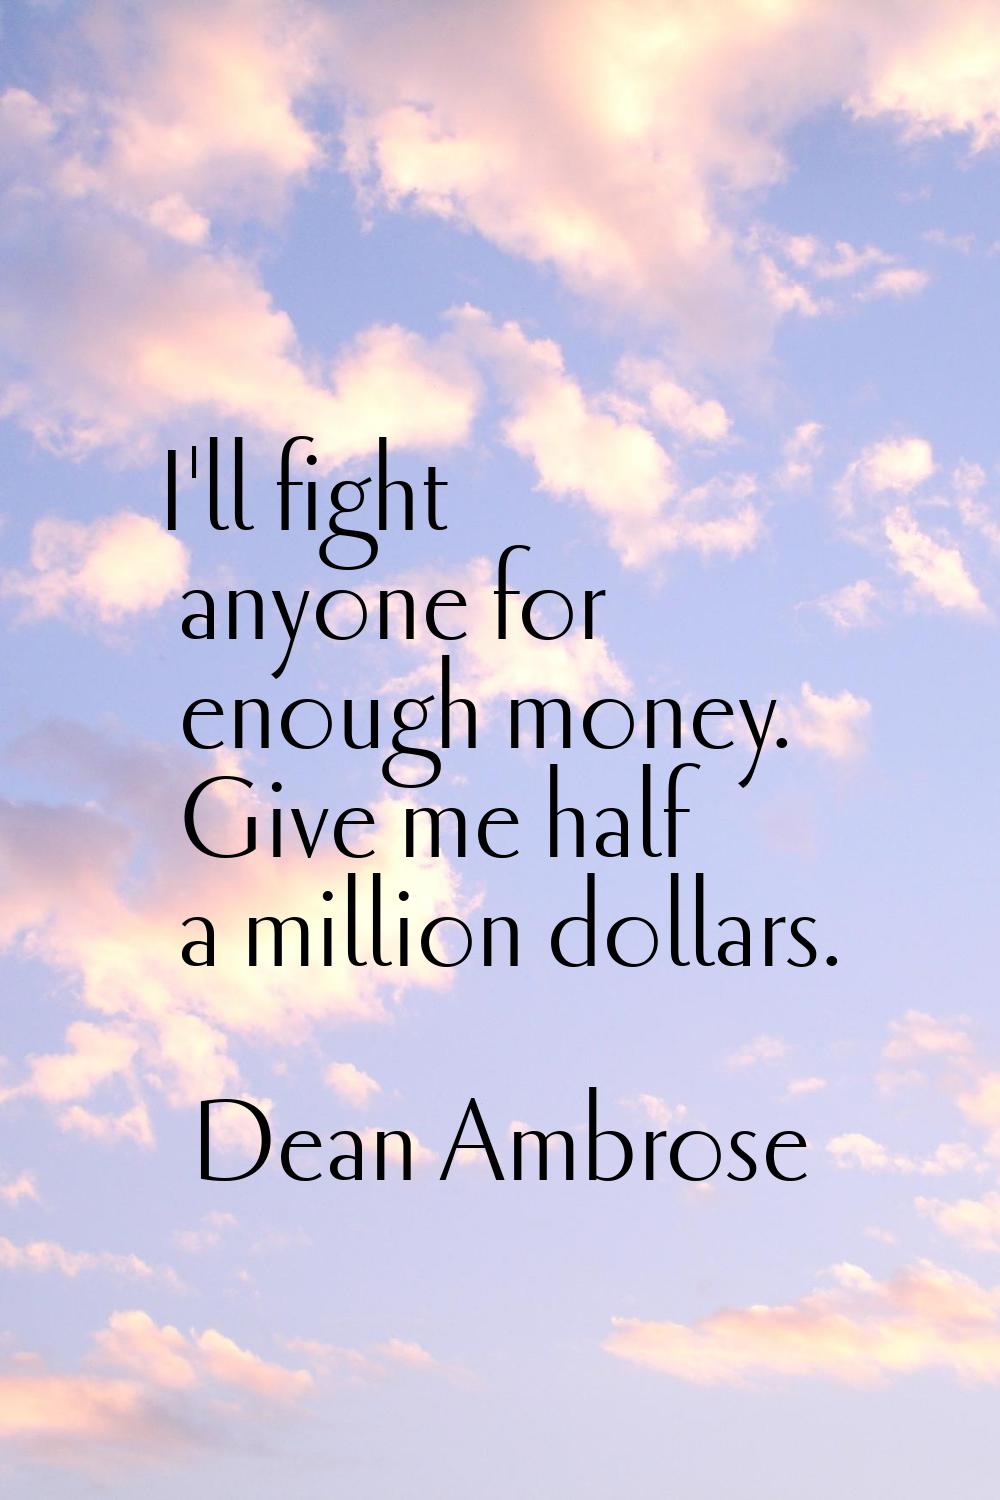 I'll fight anyone for enough money. Give me half a million dollars.